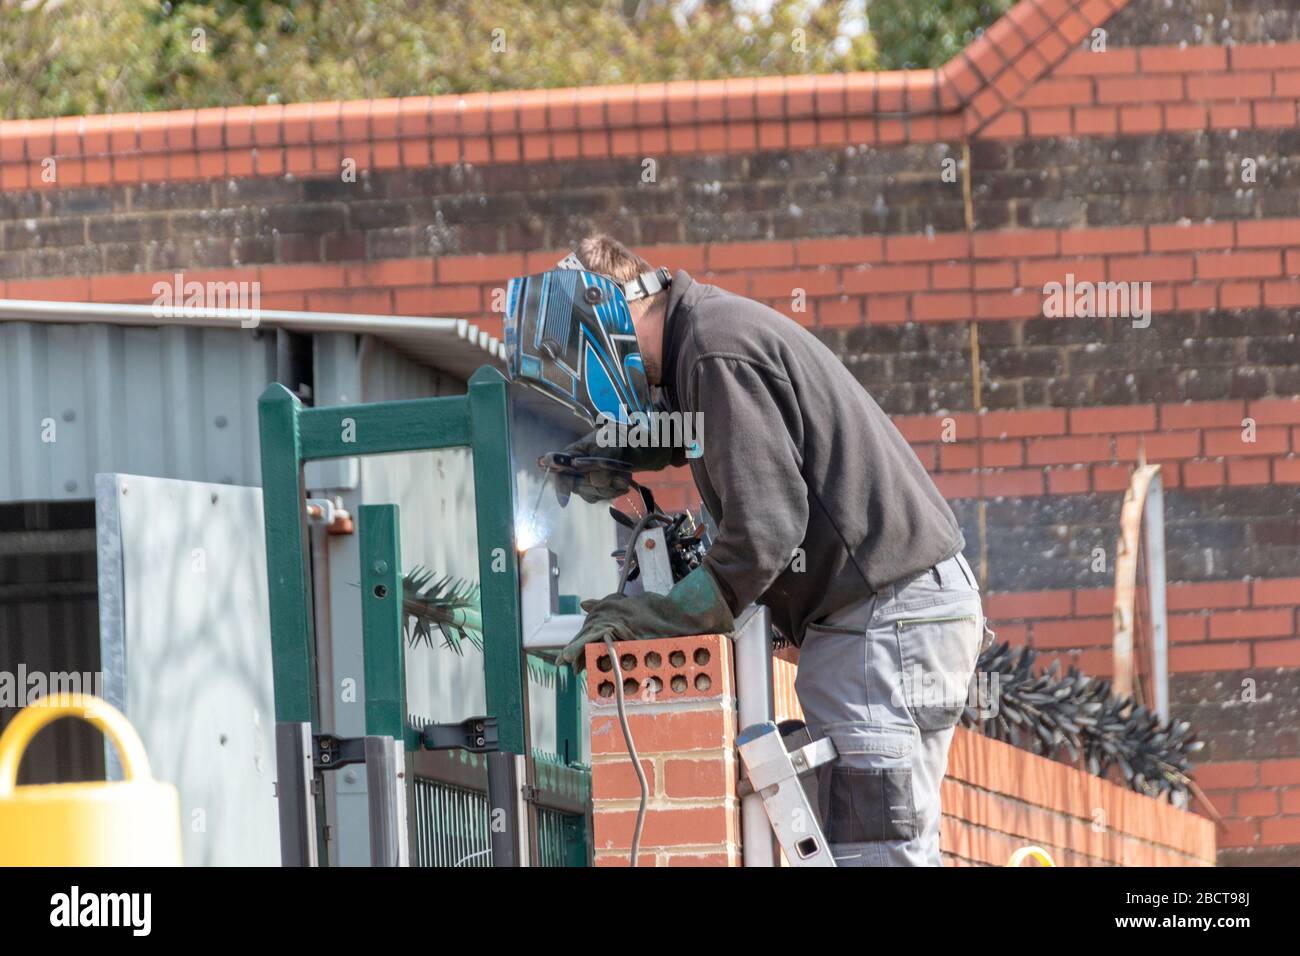 Bristol-April-2020-England, a close up view of a man welding a metal pipe to the main security gate Stock Photo